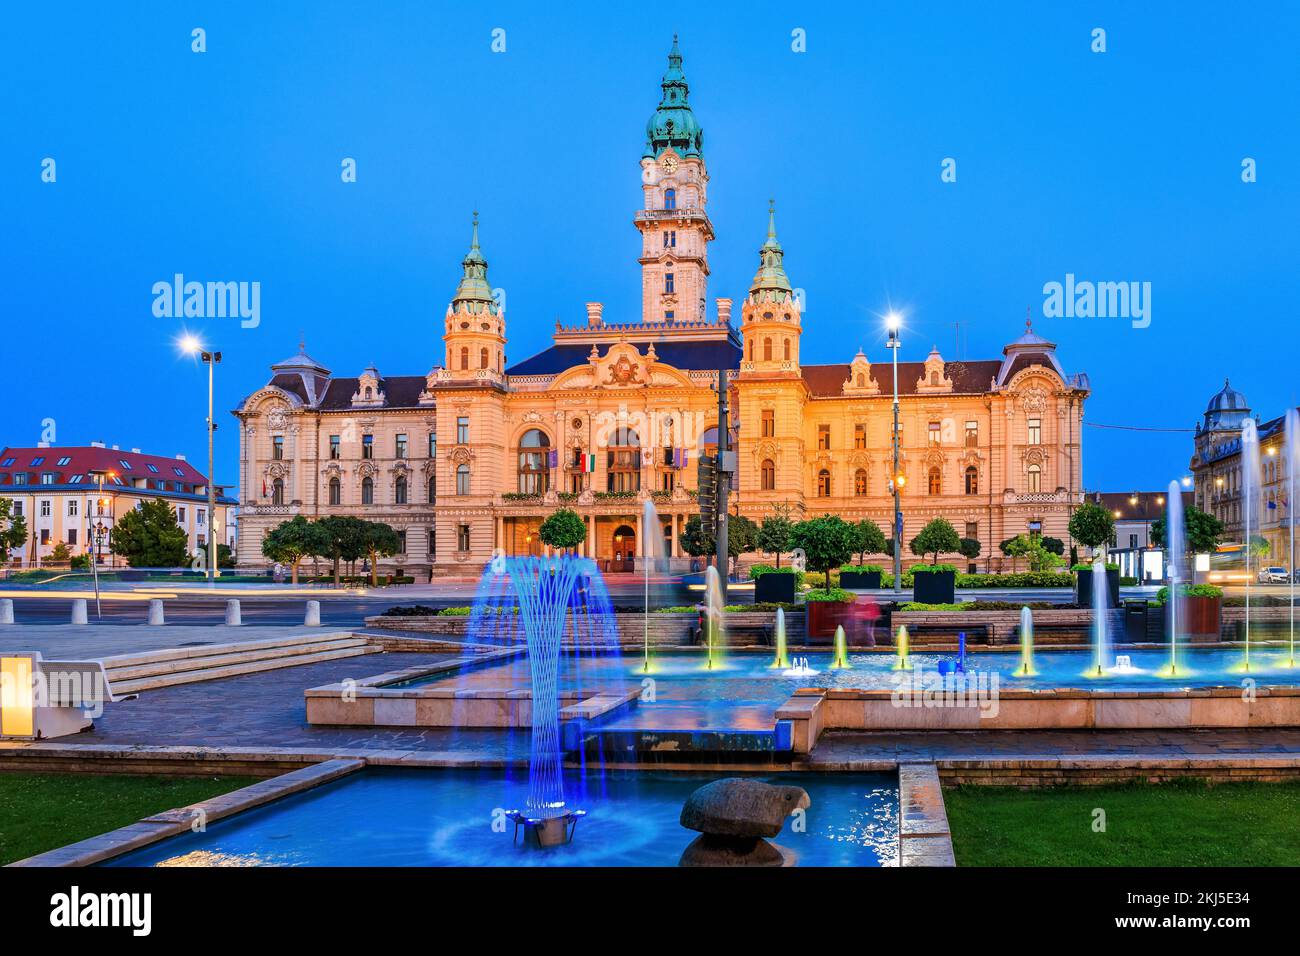 Gyor, Hungary. View of the town hall and water fountain at night. Stock Photo